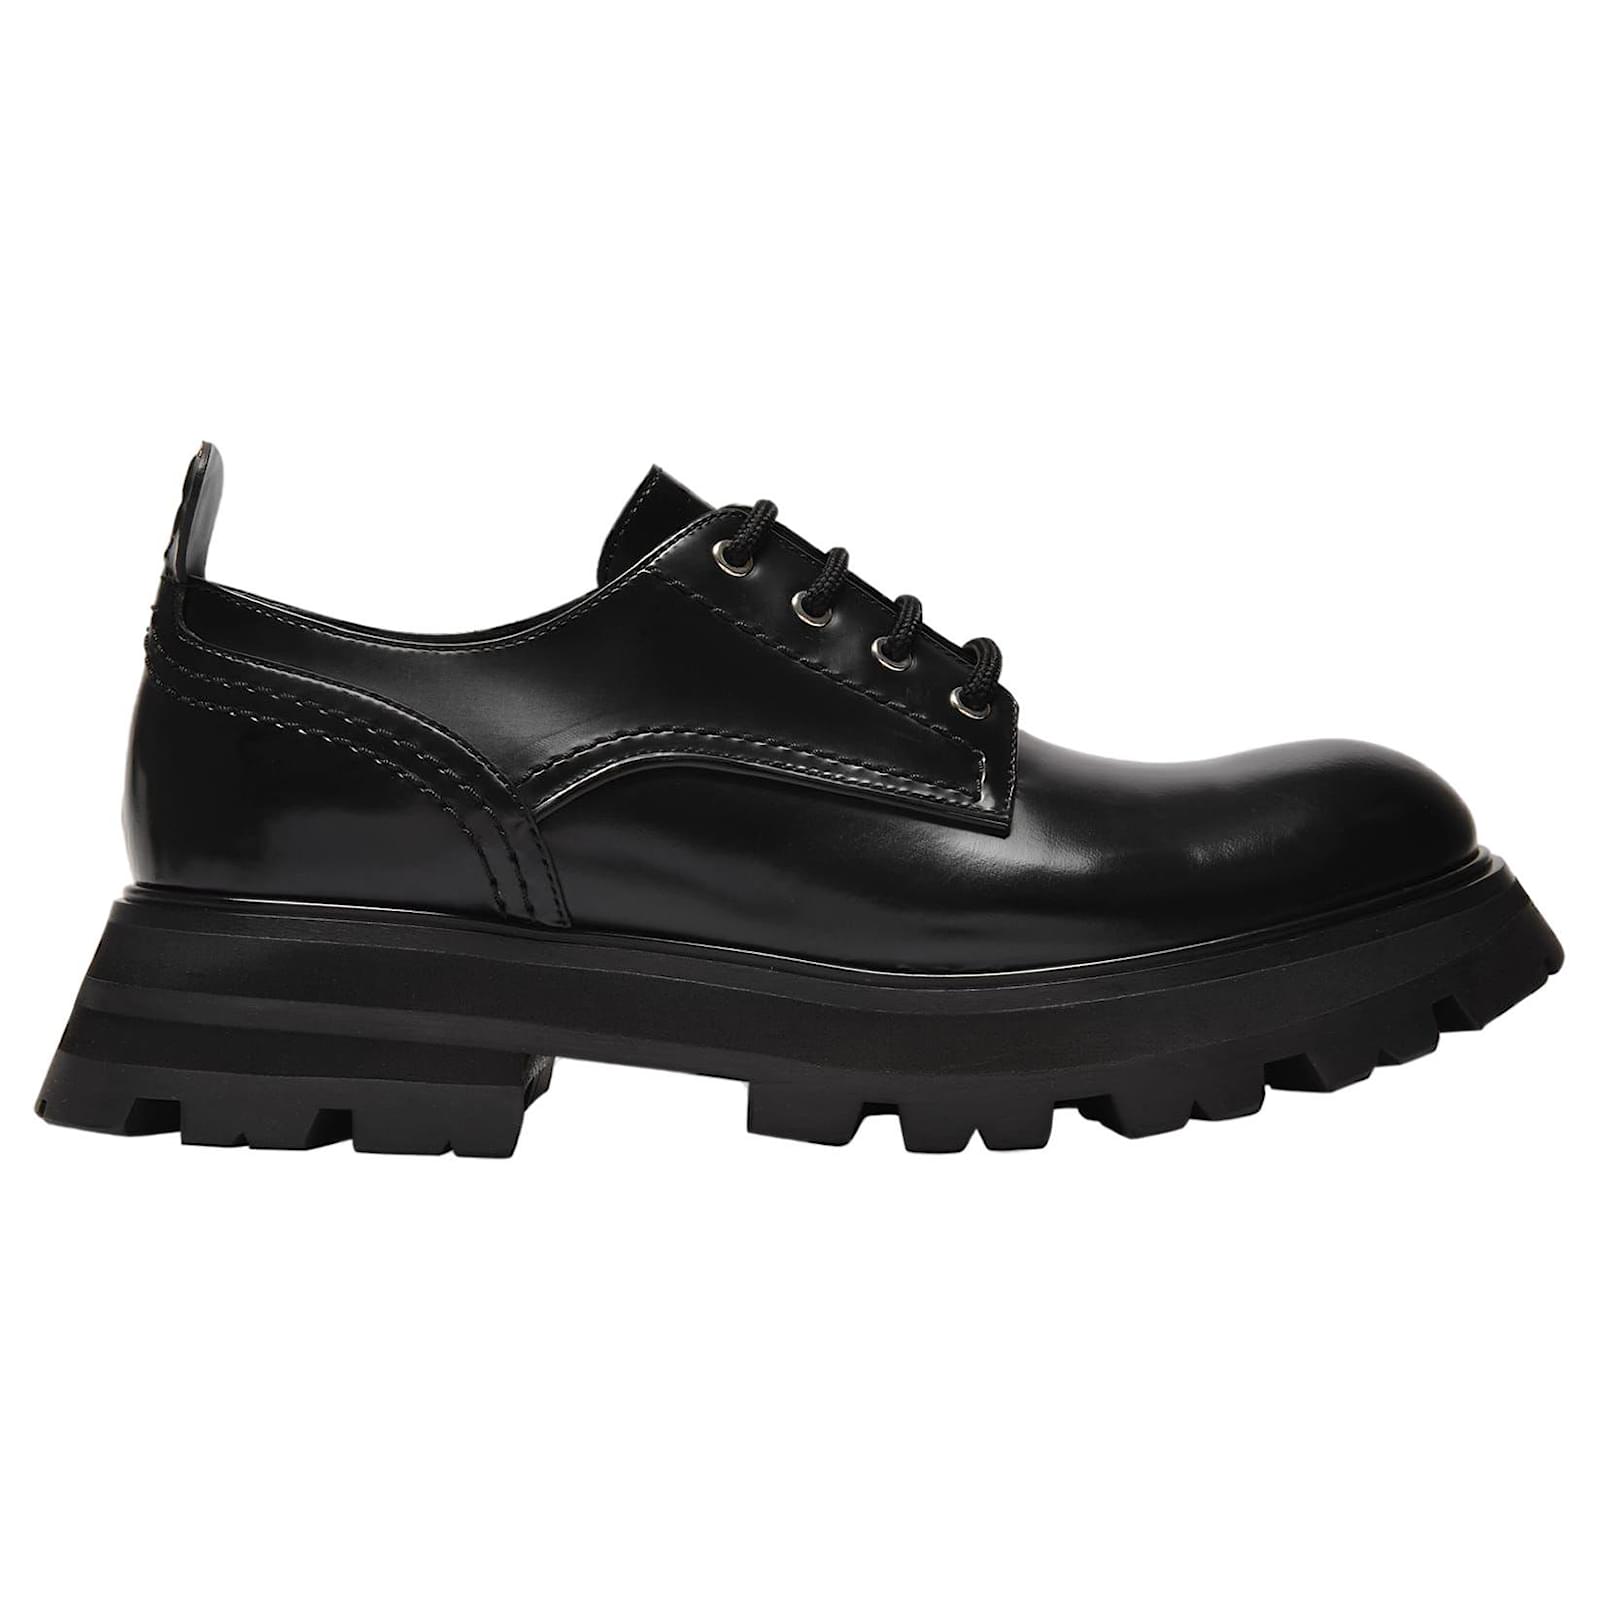 Womens Shoes Flats and flat shoes Lace Up shoes and boots Alexander McQueen Black Leather Derby Shoes 